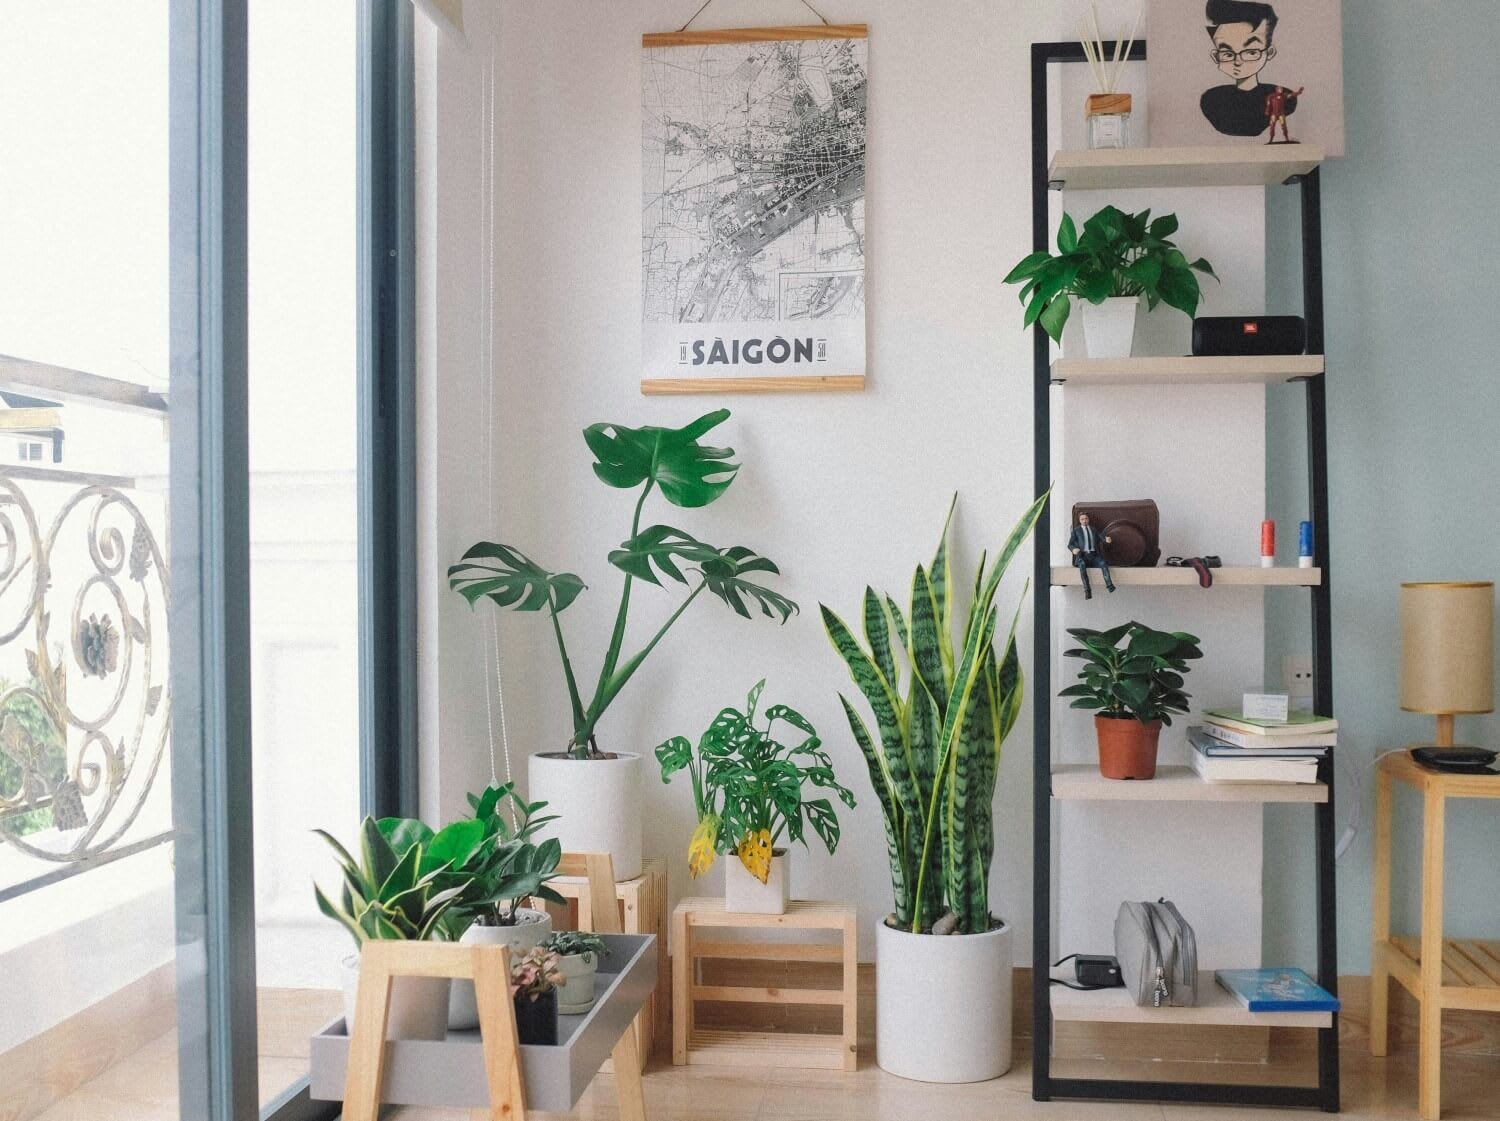 a nice background with plants, a map, and some other items